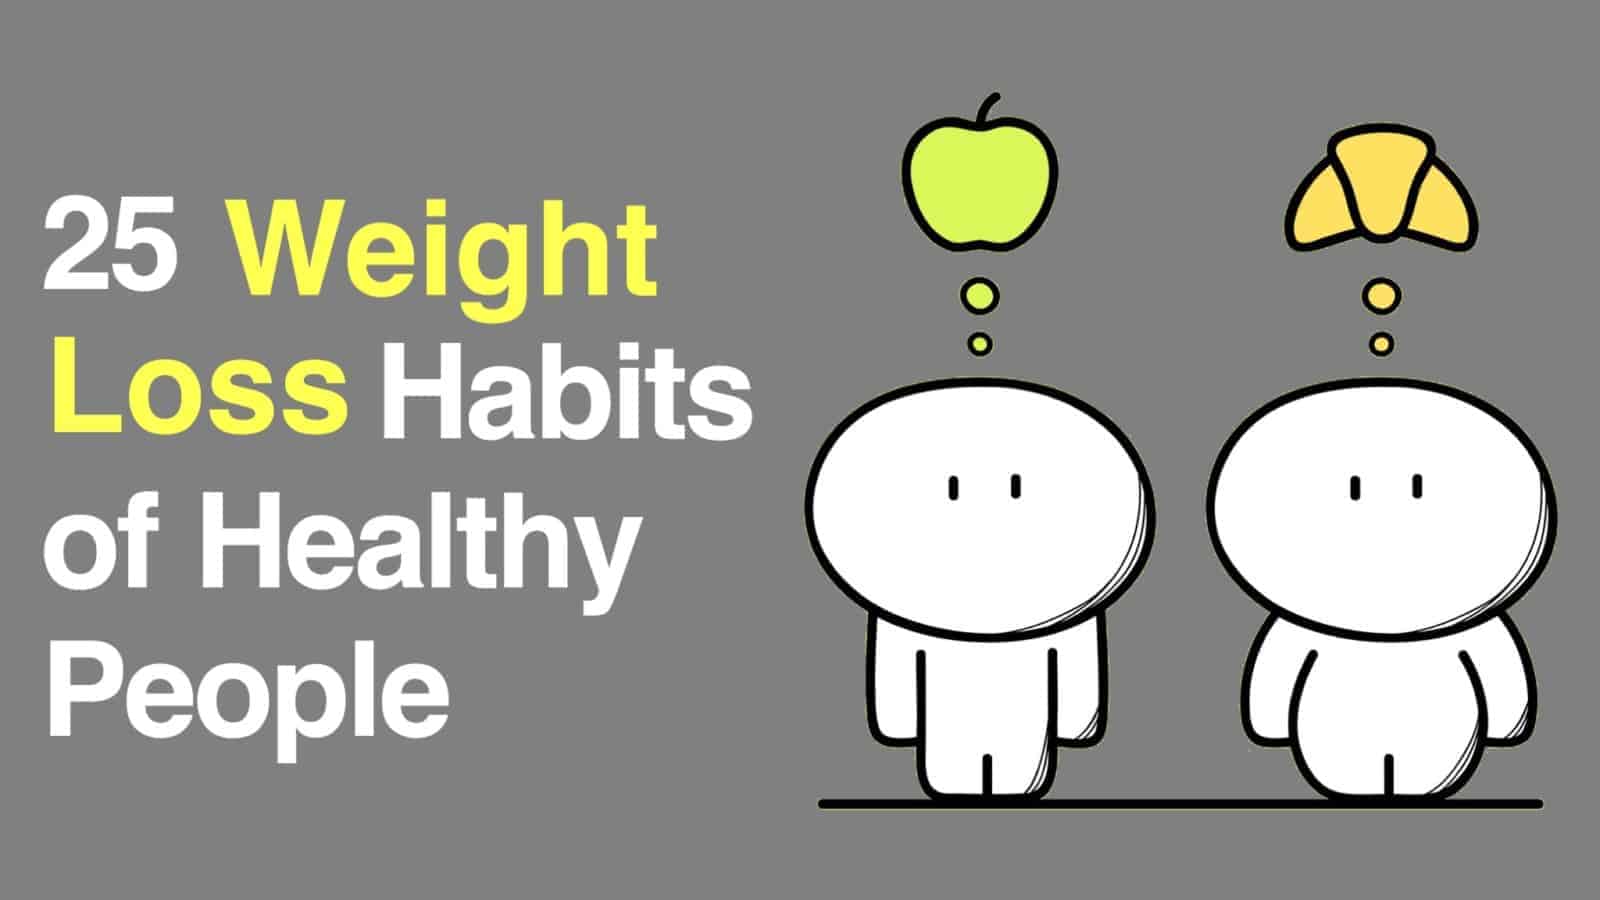 25 Weight Loss Habits of Healthy People